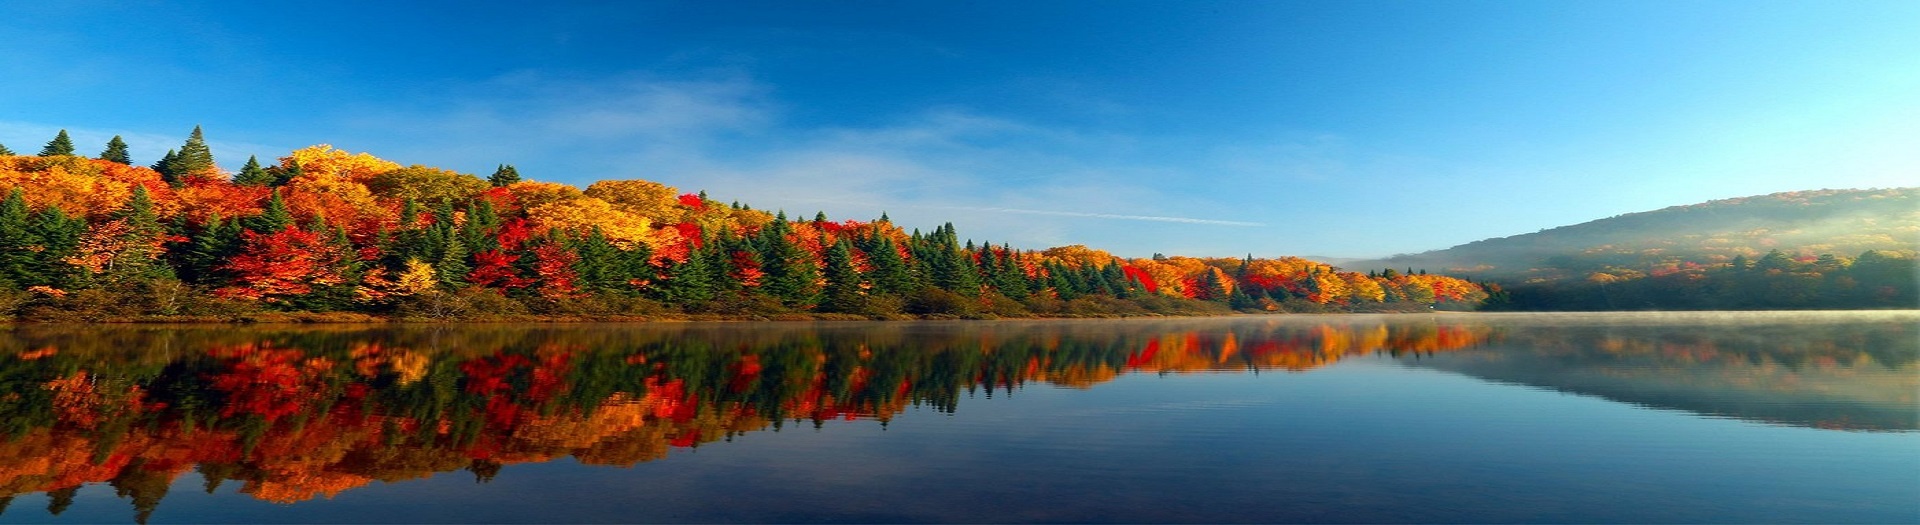 Quebec's Indian Summer in liberty